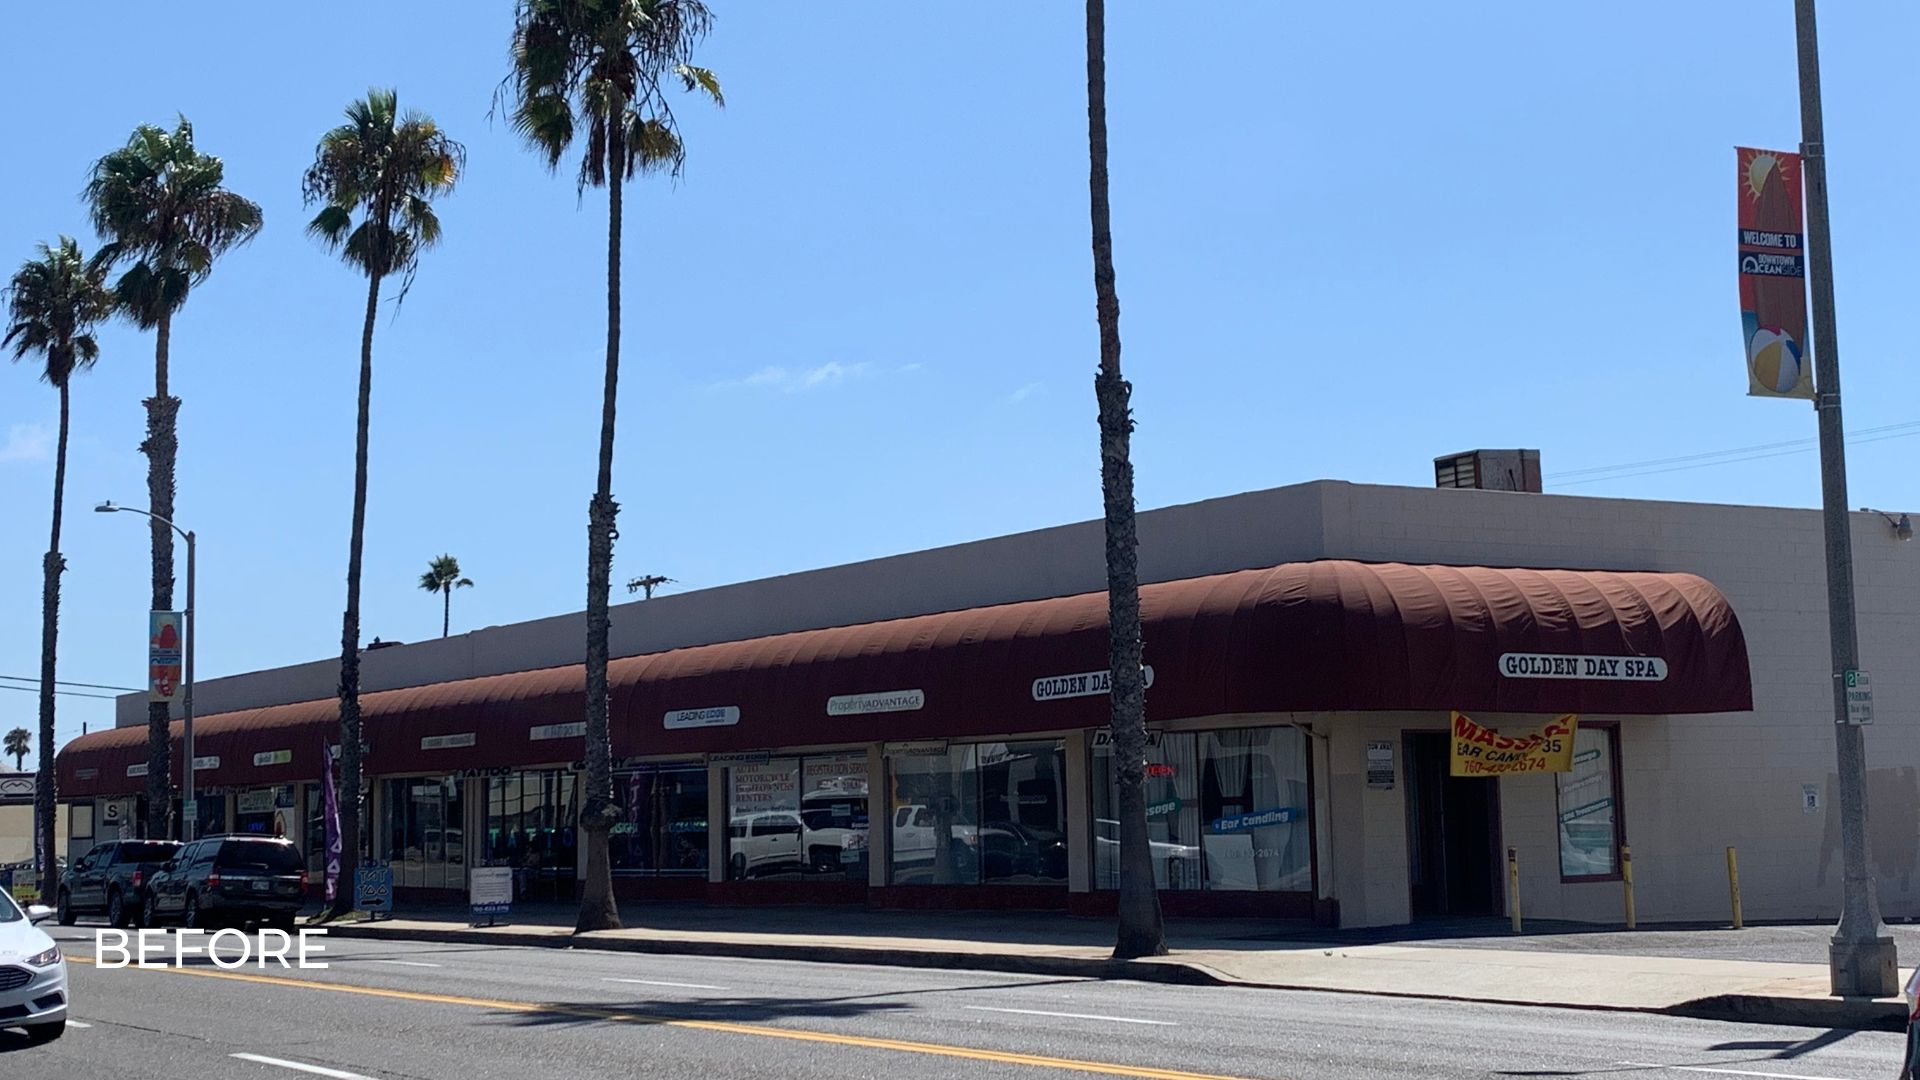 exterior building storefronts in california, plants, palm trees